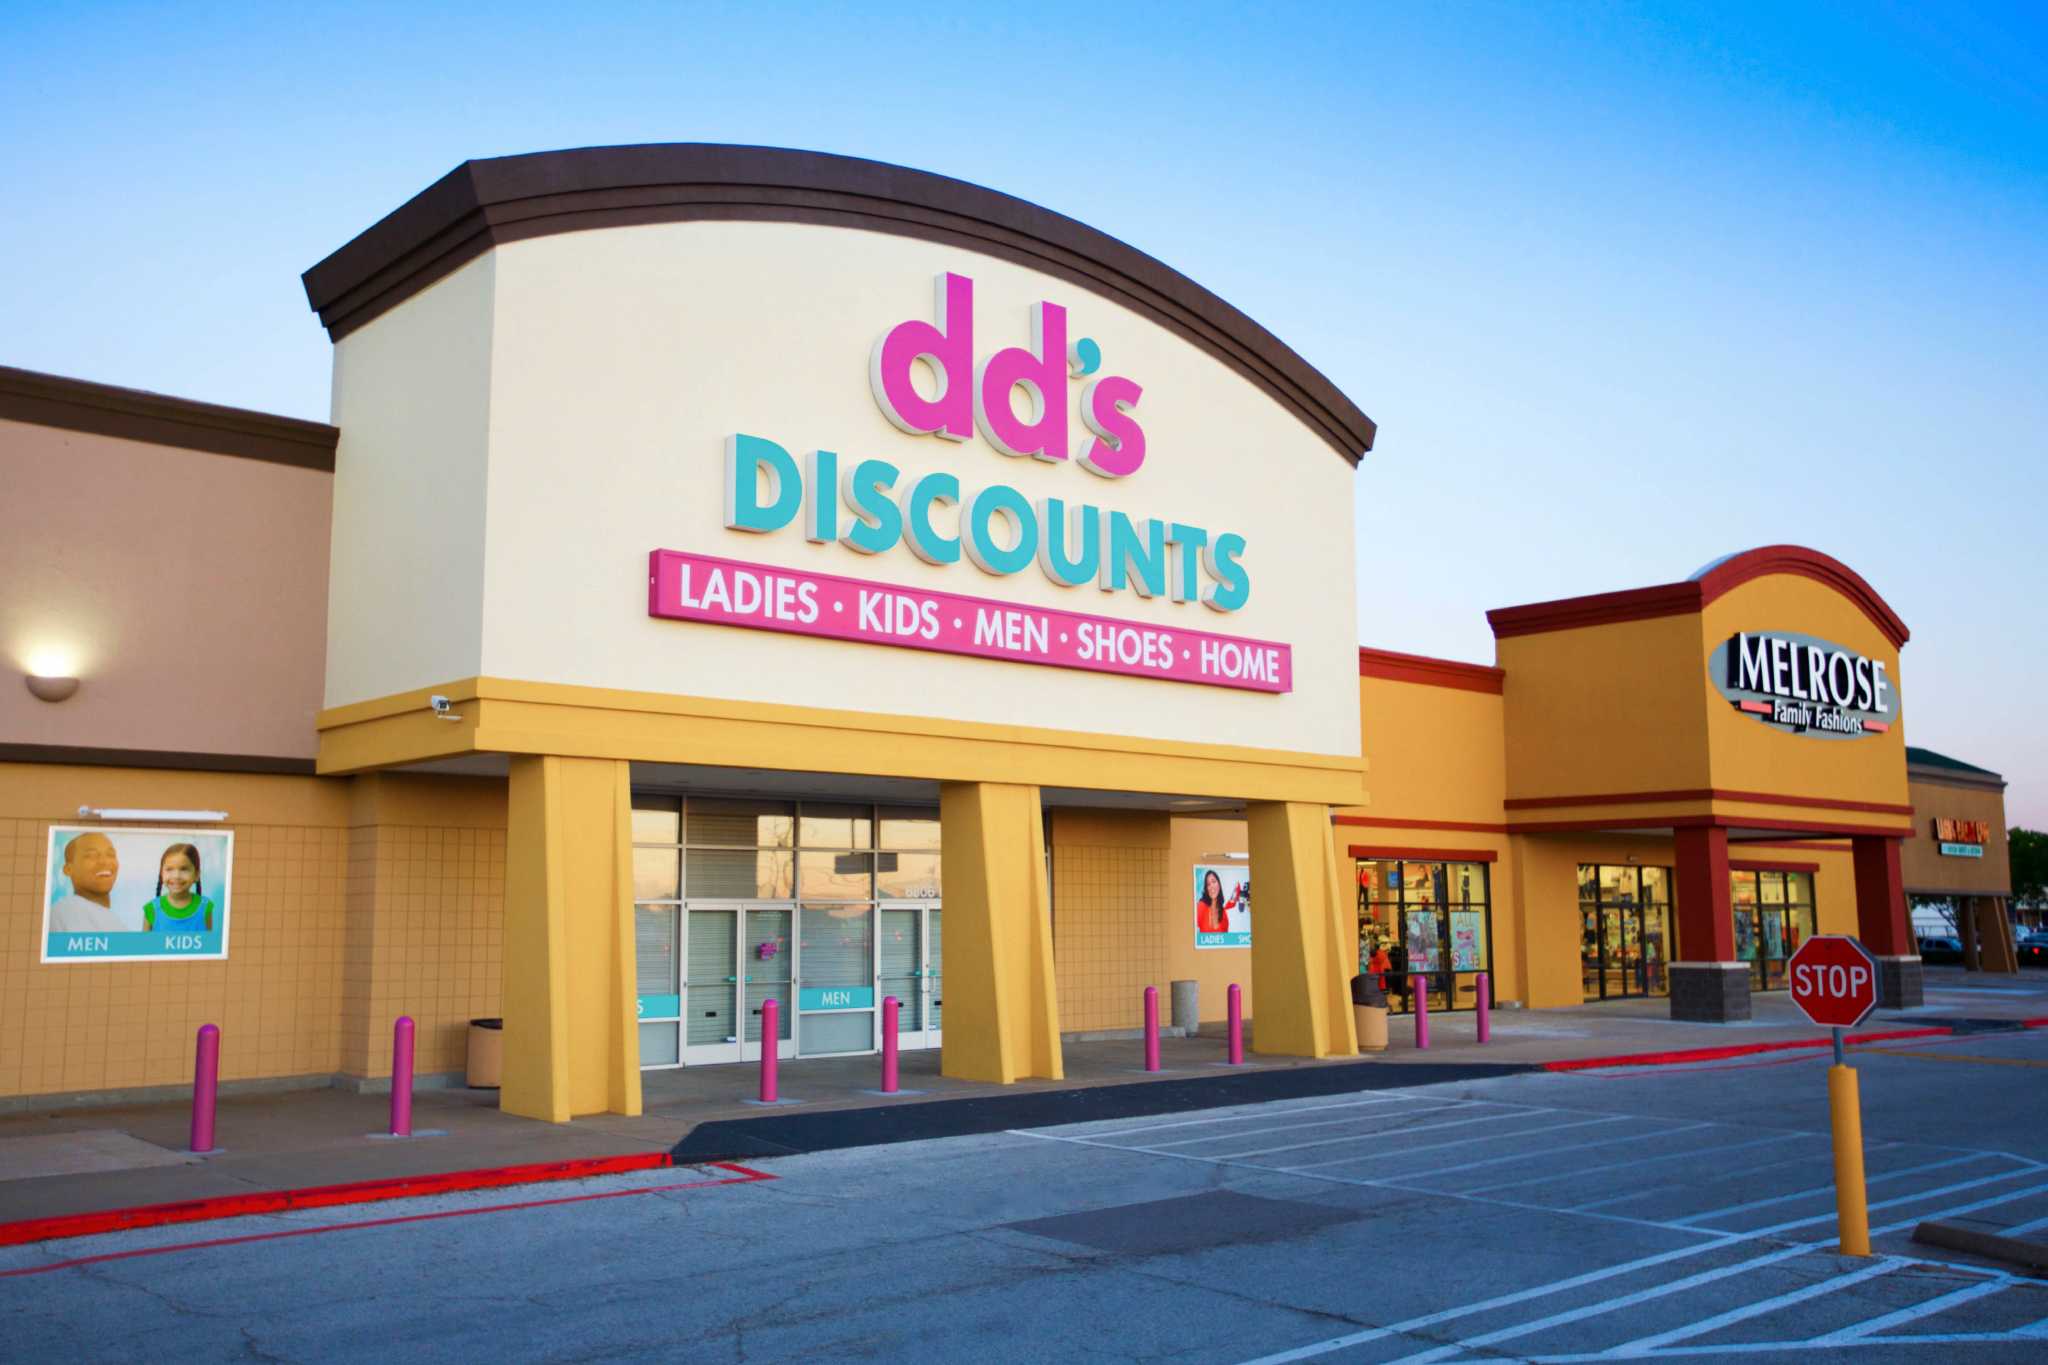 dd-s-discounts-adding-2-stores-in-houston-area-houston-chronicle